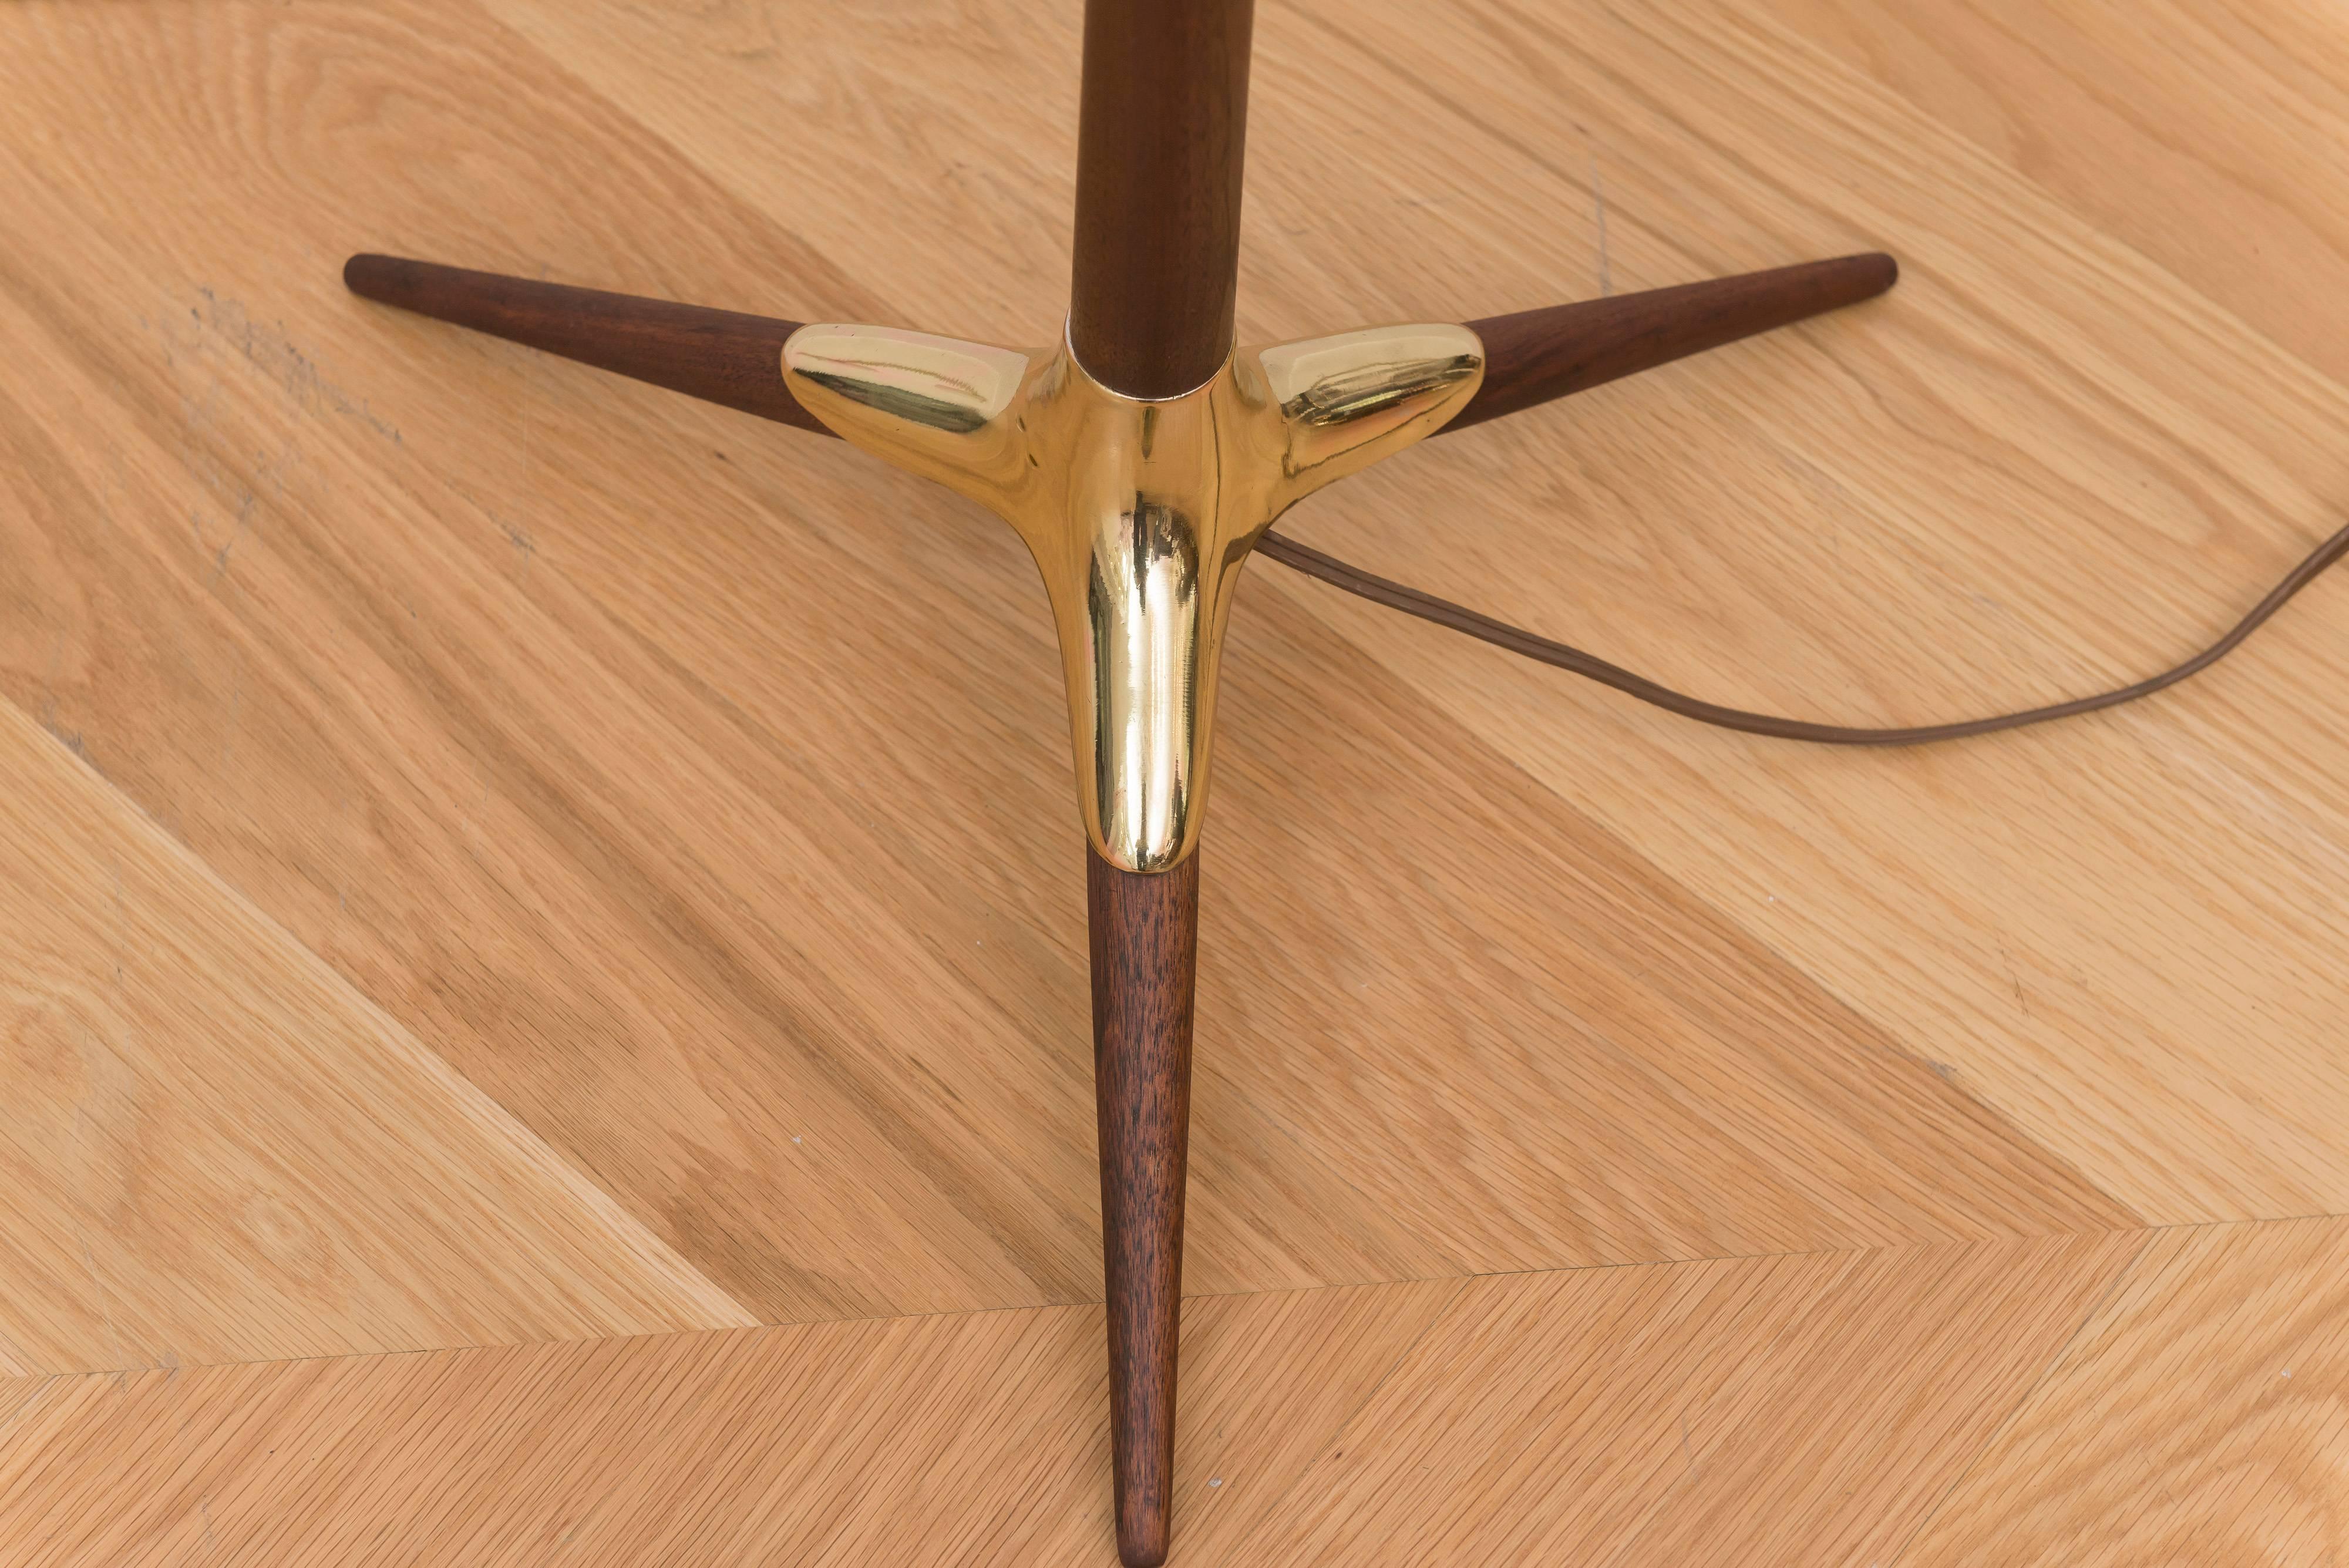 Completely restored tri foot brass and walnut floor lamp.
